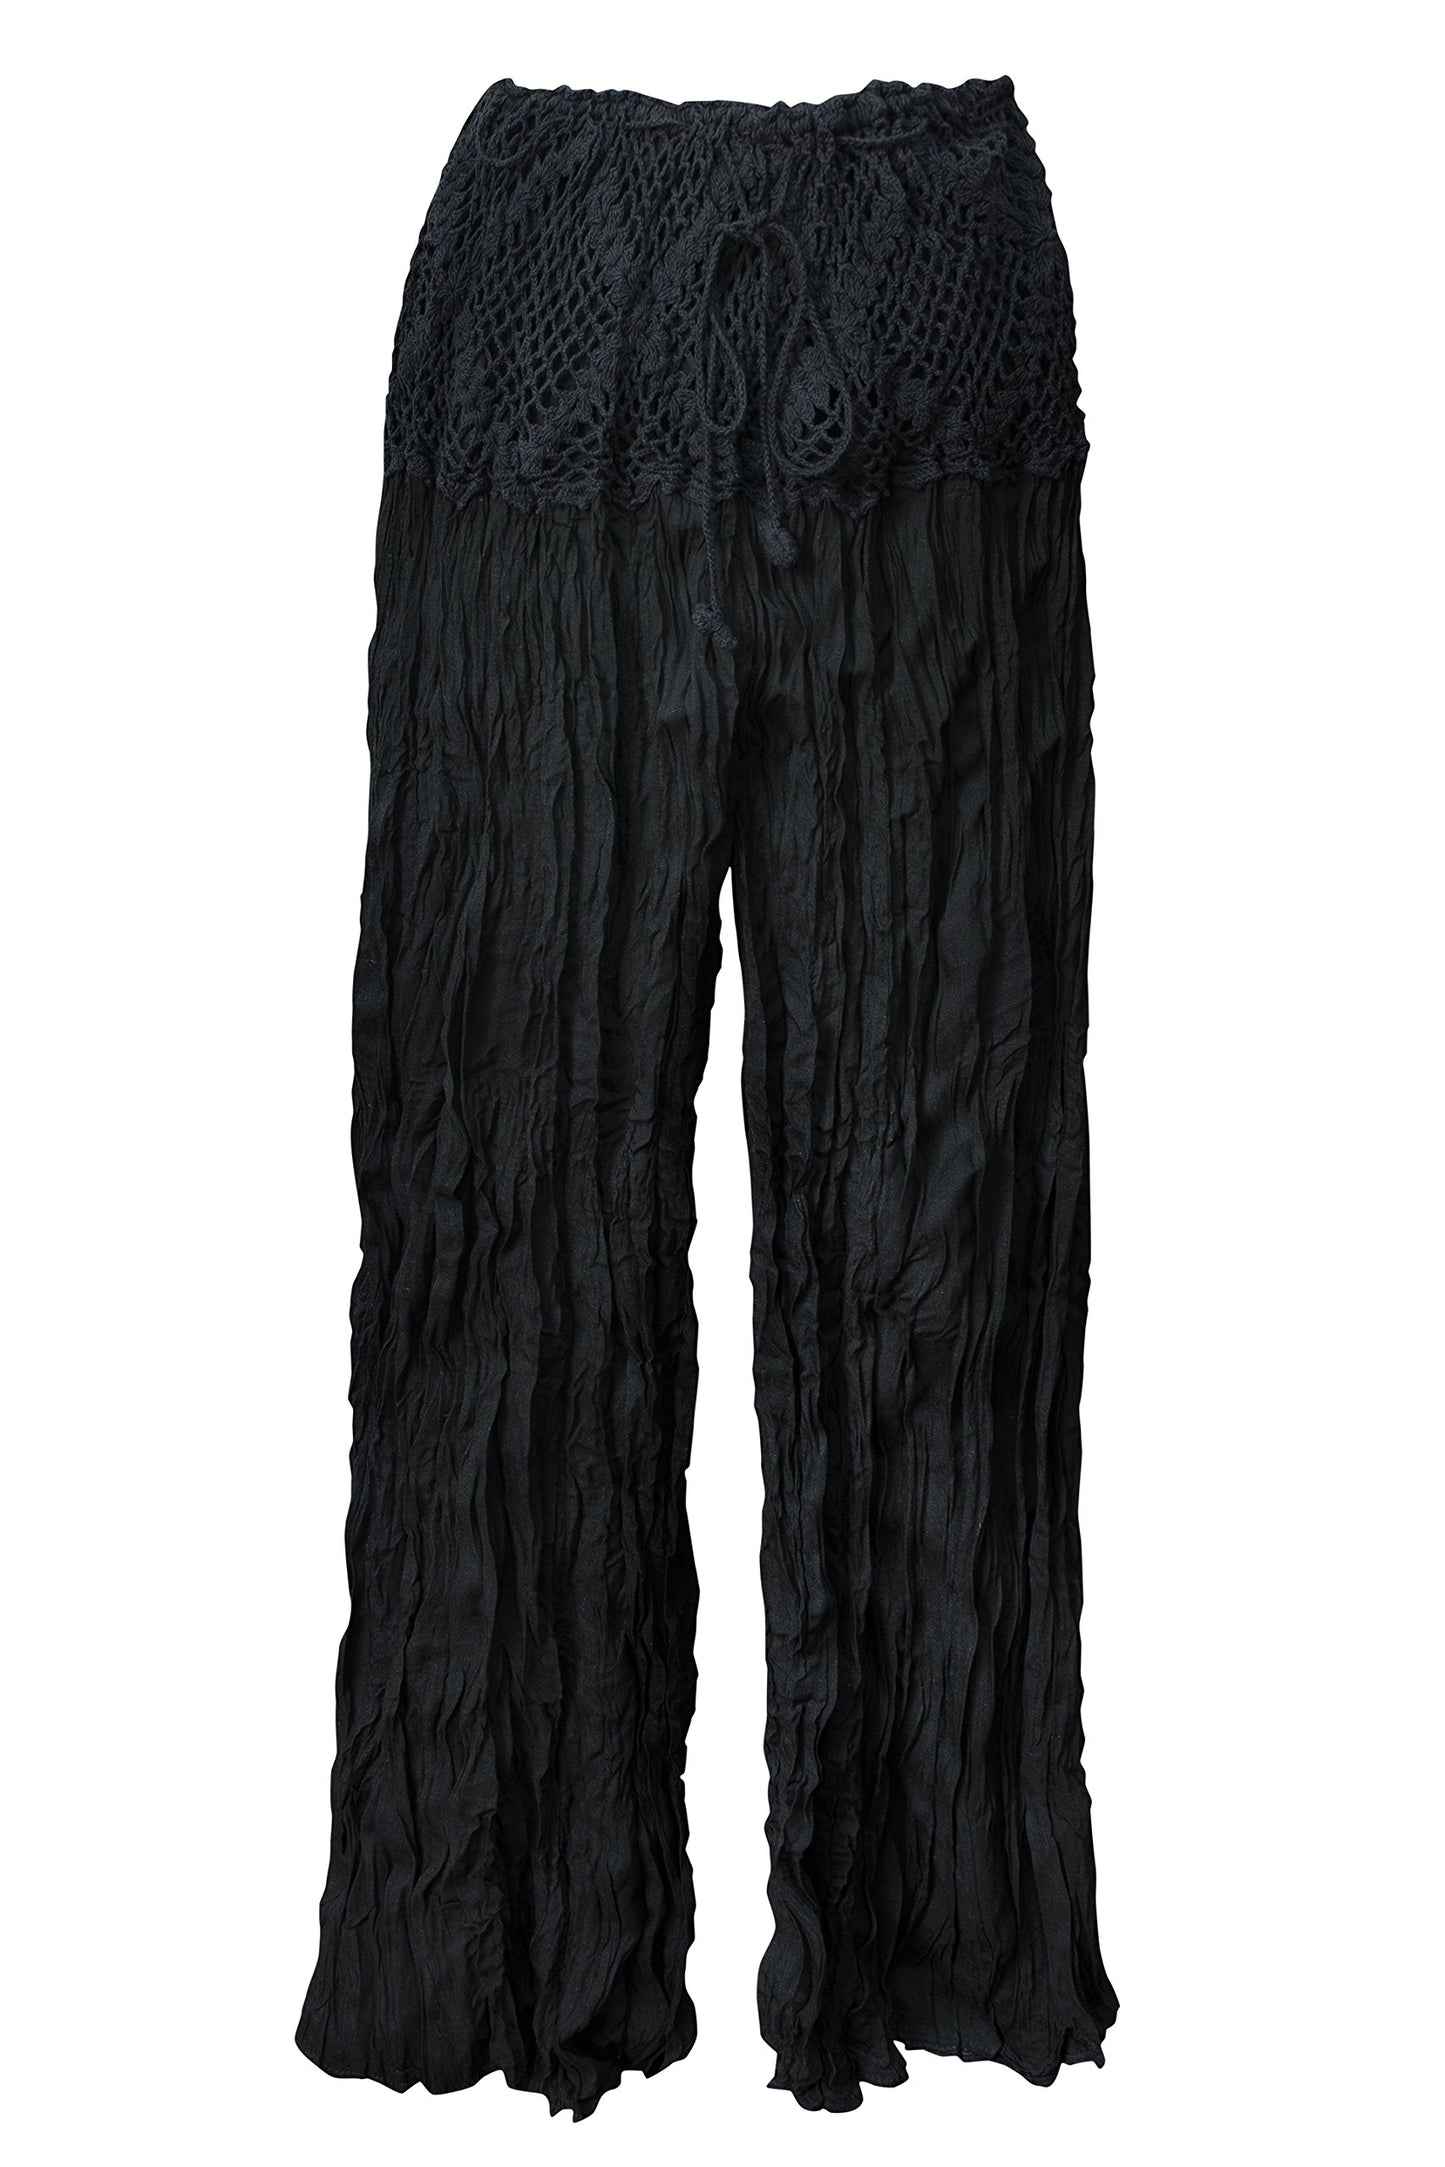 Cotton Palazzo Flare with Crochet Waist Trouser